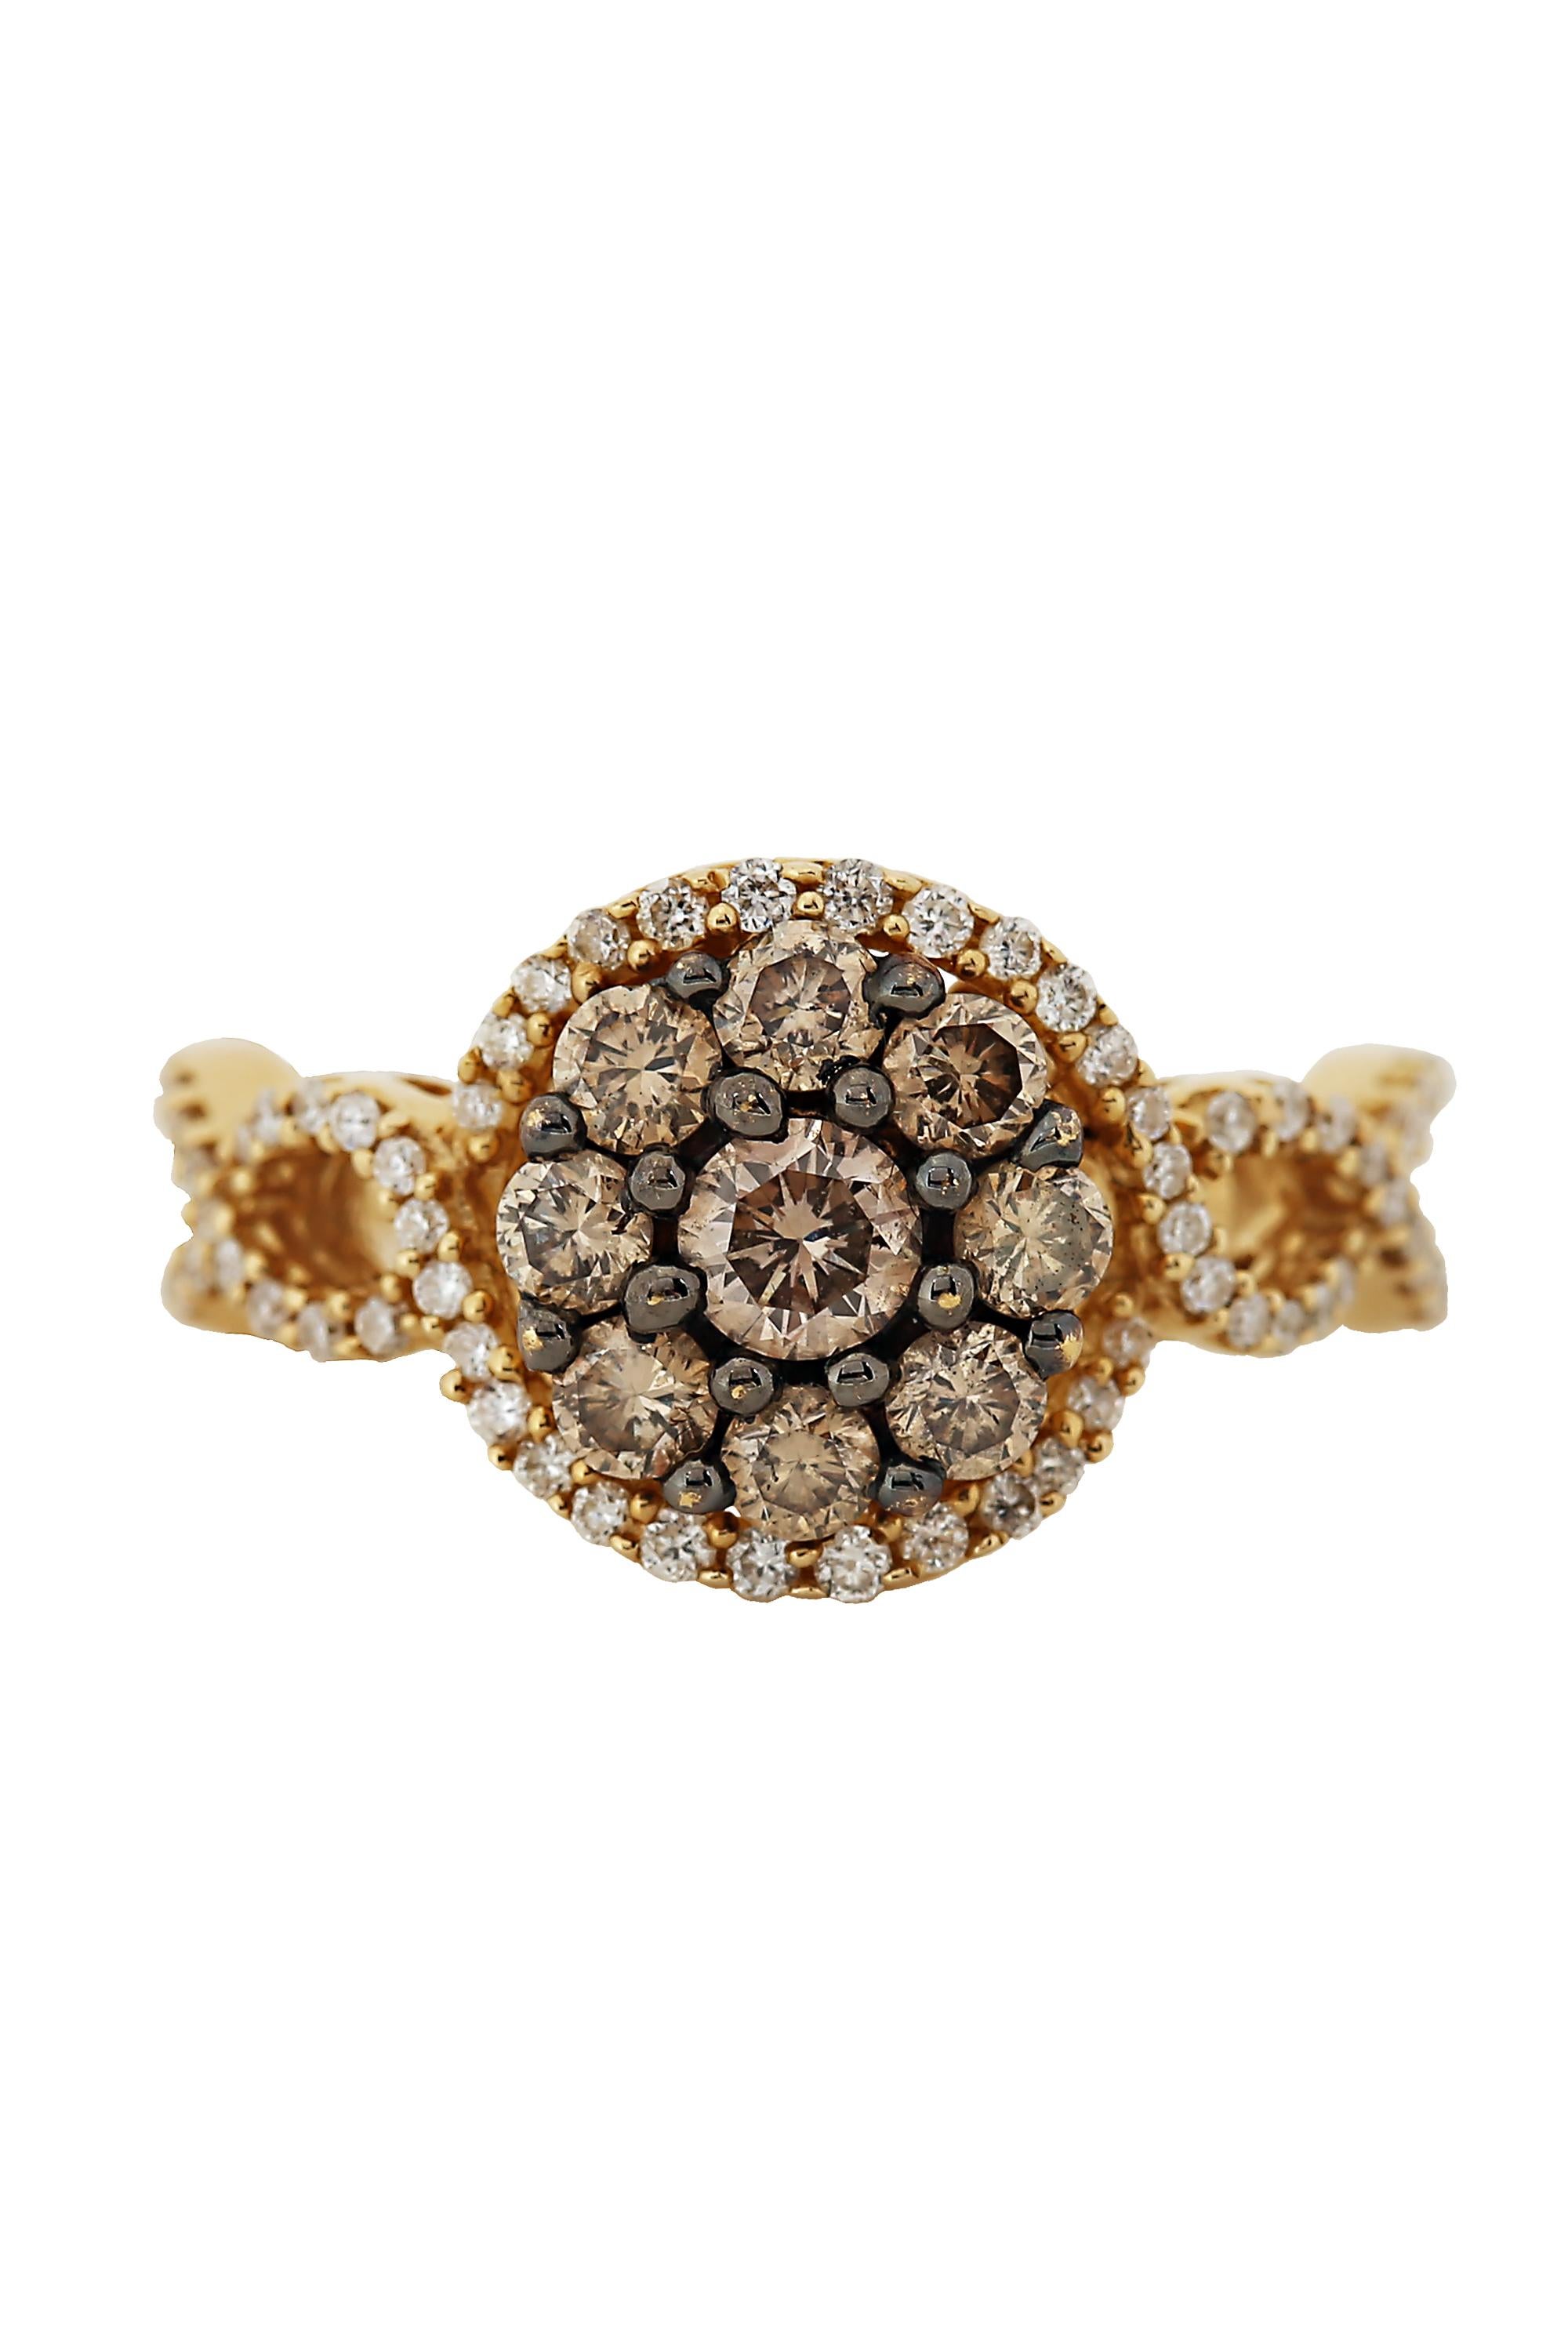 Colored Diamond Cluster Ring In Excellent Condition For Sale In beverly hills, CA